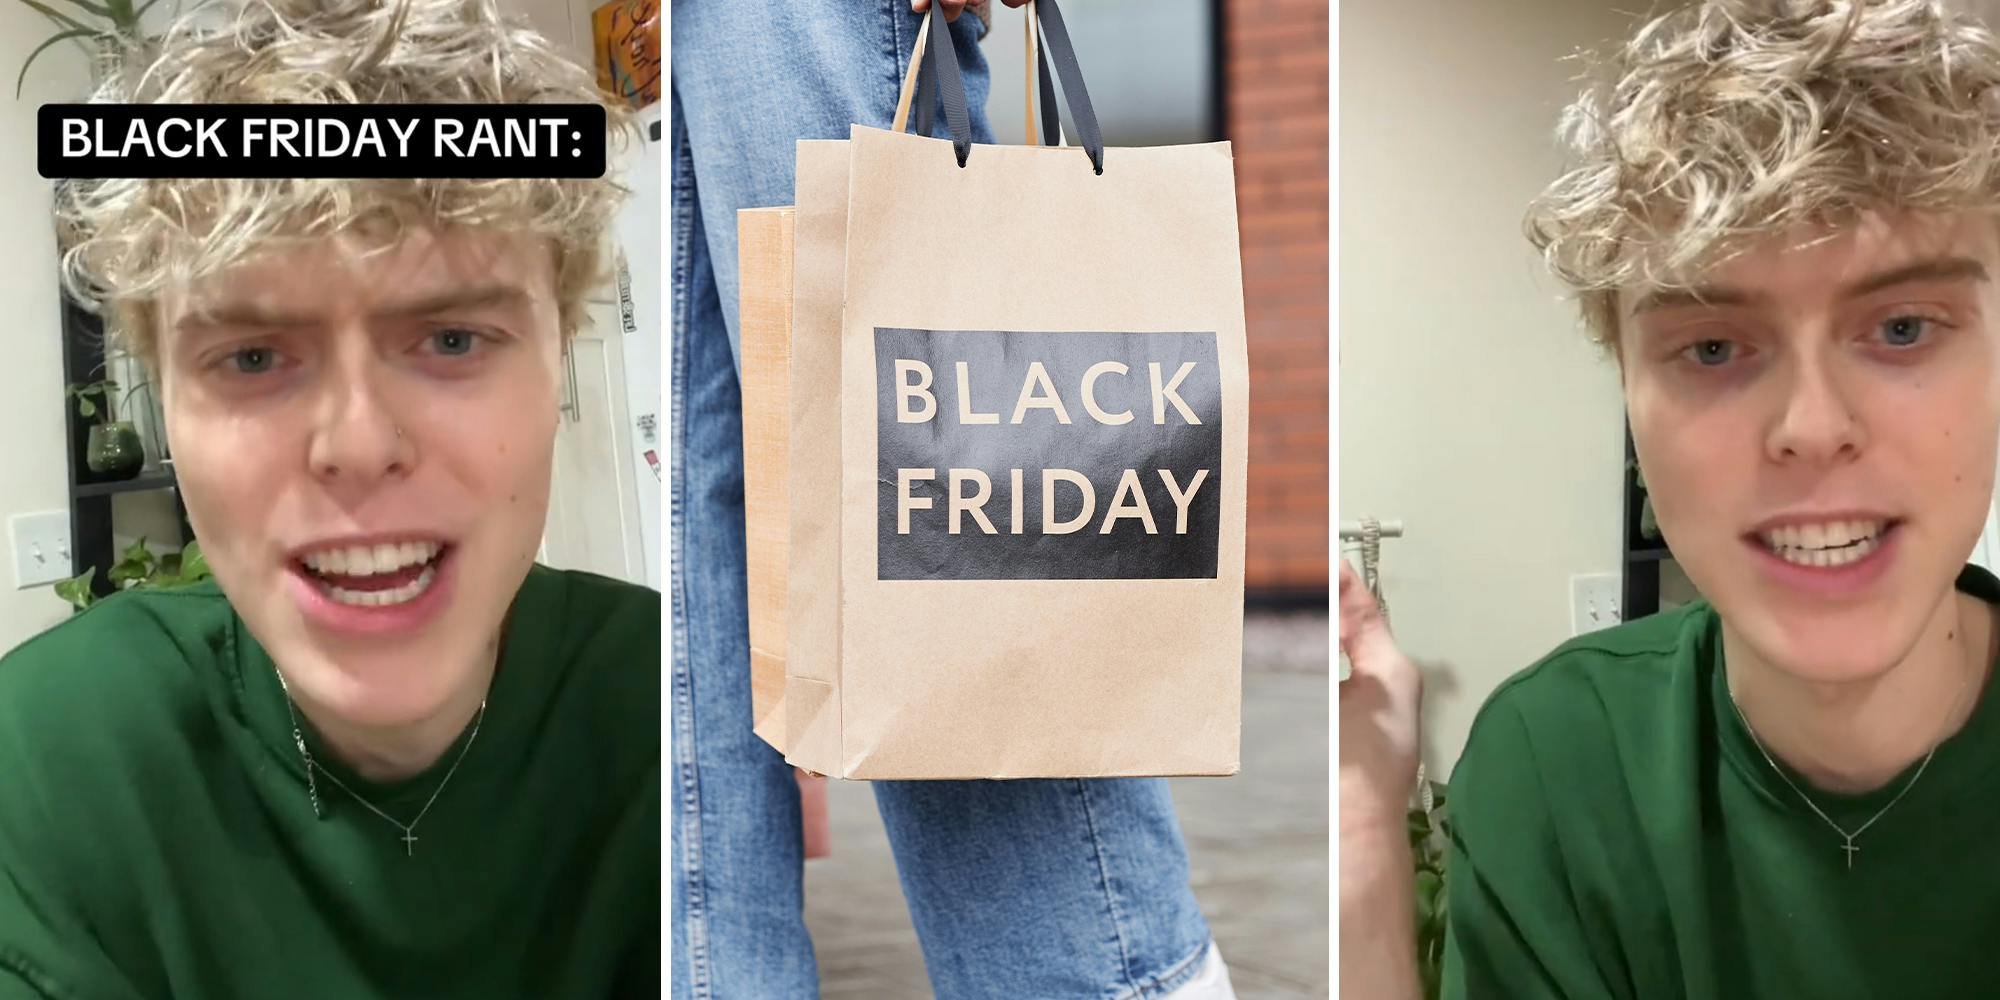 'That sh*t used to be like the Hunger Games': Shopper says Black Friday deals aren't what they used to be, calls out stores for small discounts